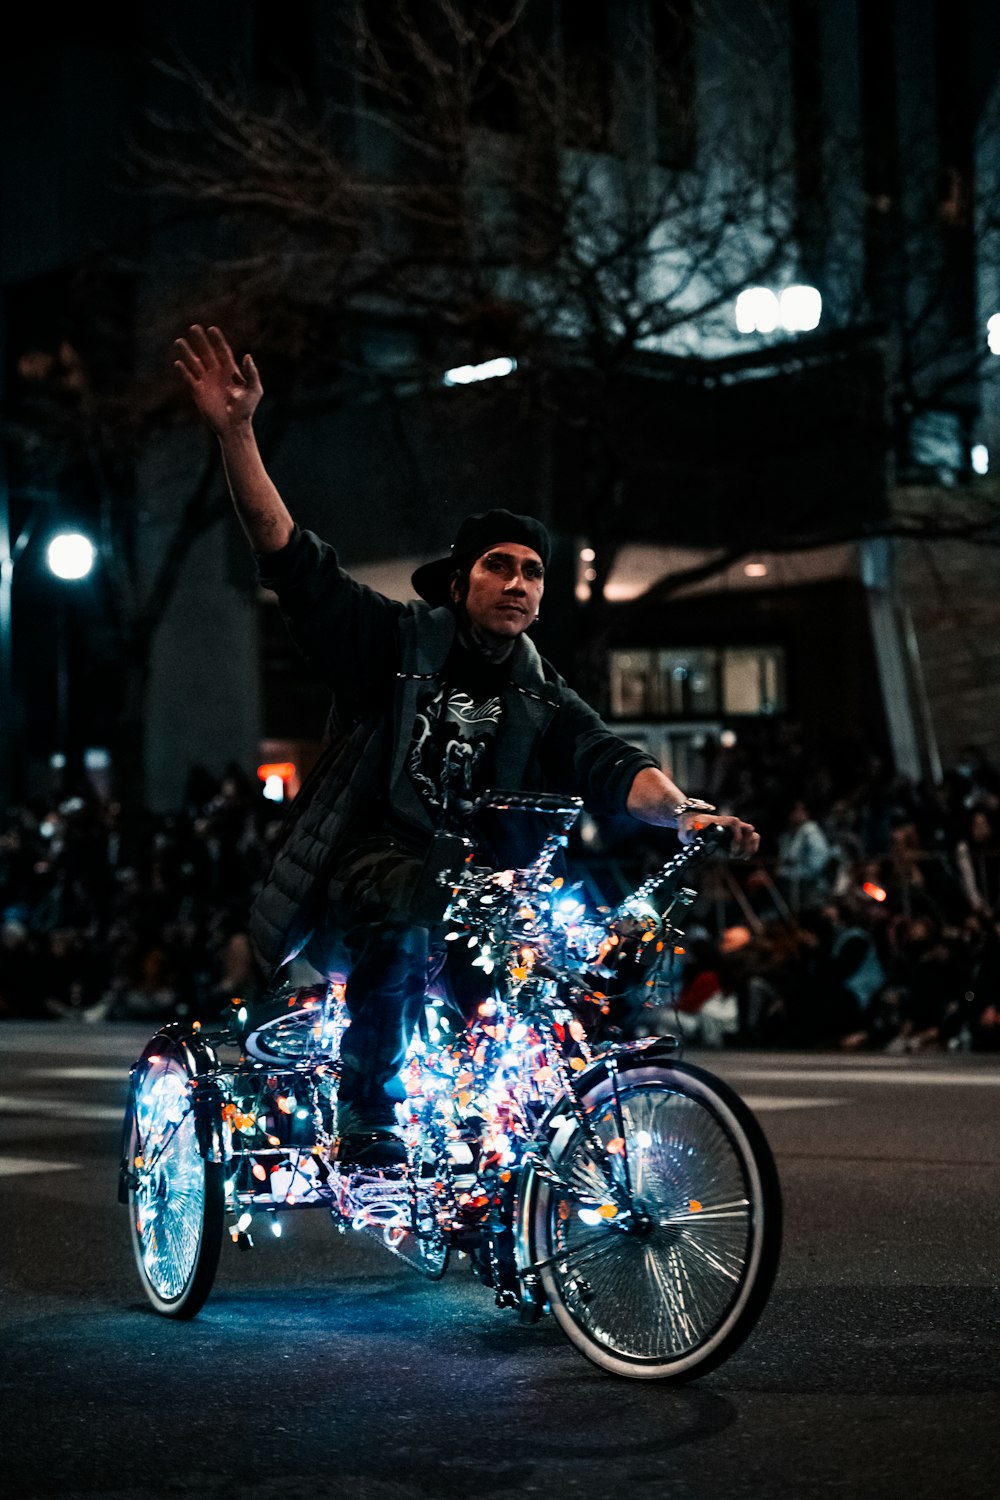 a man riding a bike with a lot of lights on it